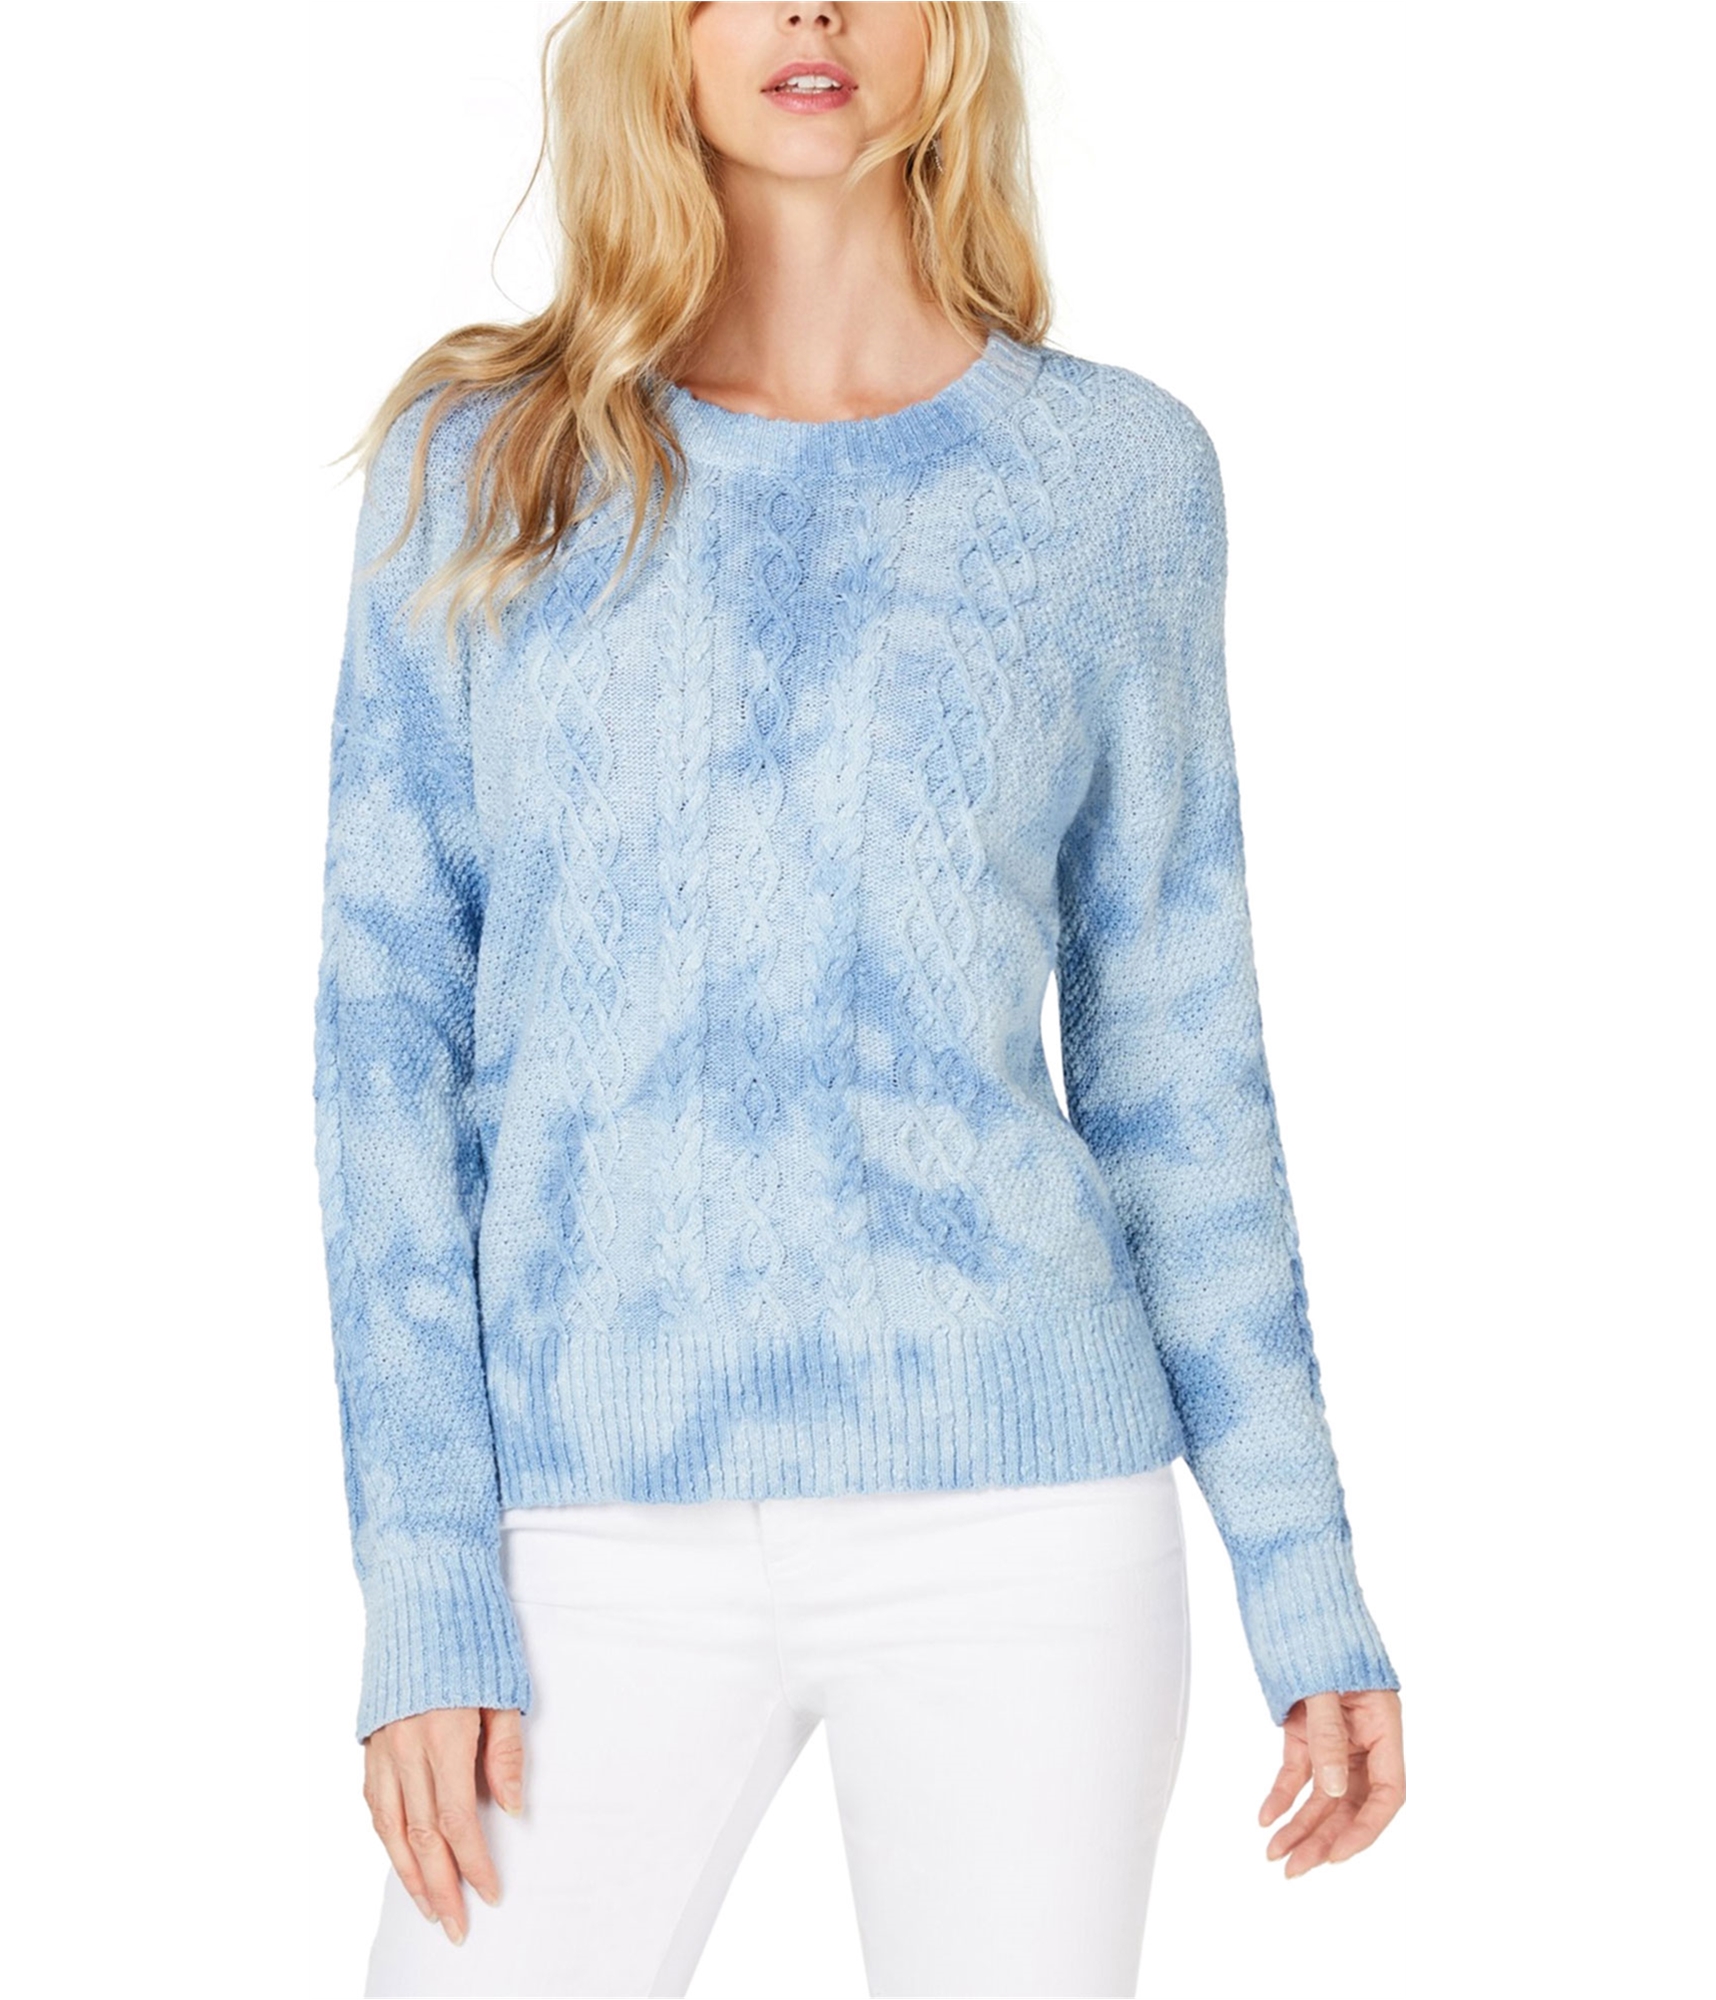 I-N-C Womens Chunky Cable Knit Sweater, Blue, X-Large | eBay